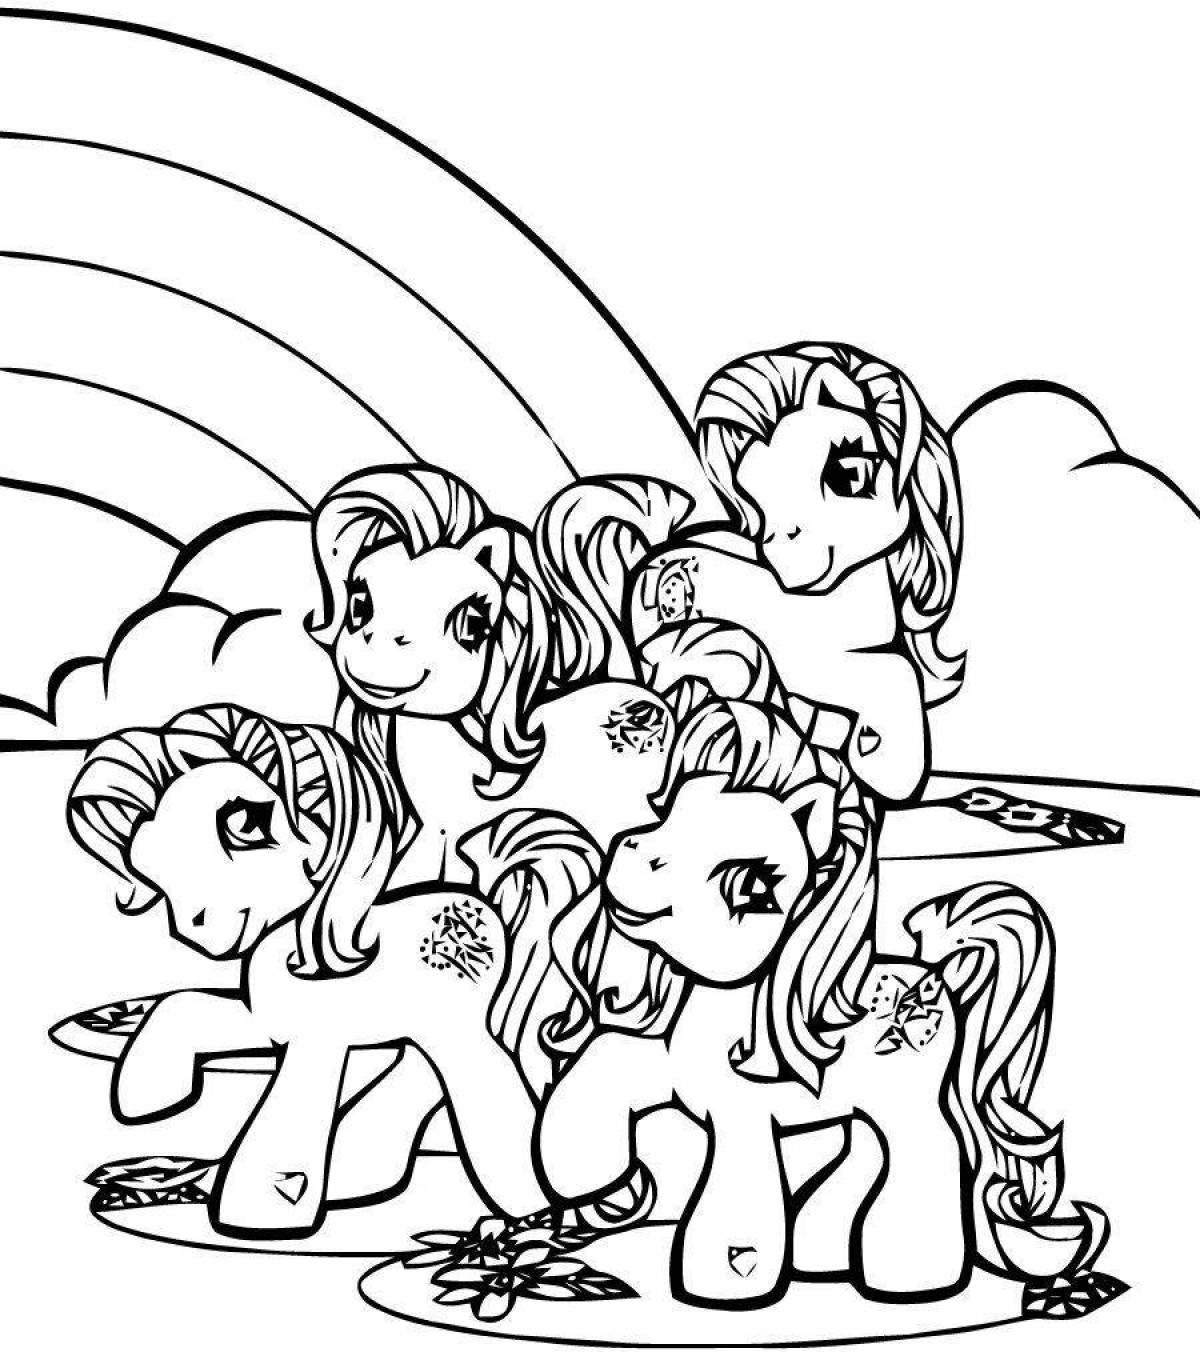 Color-mania rainbow friends coloring page